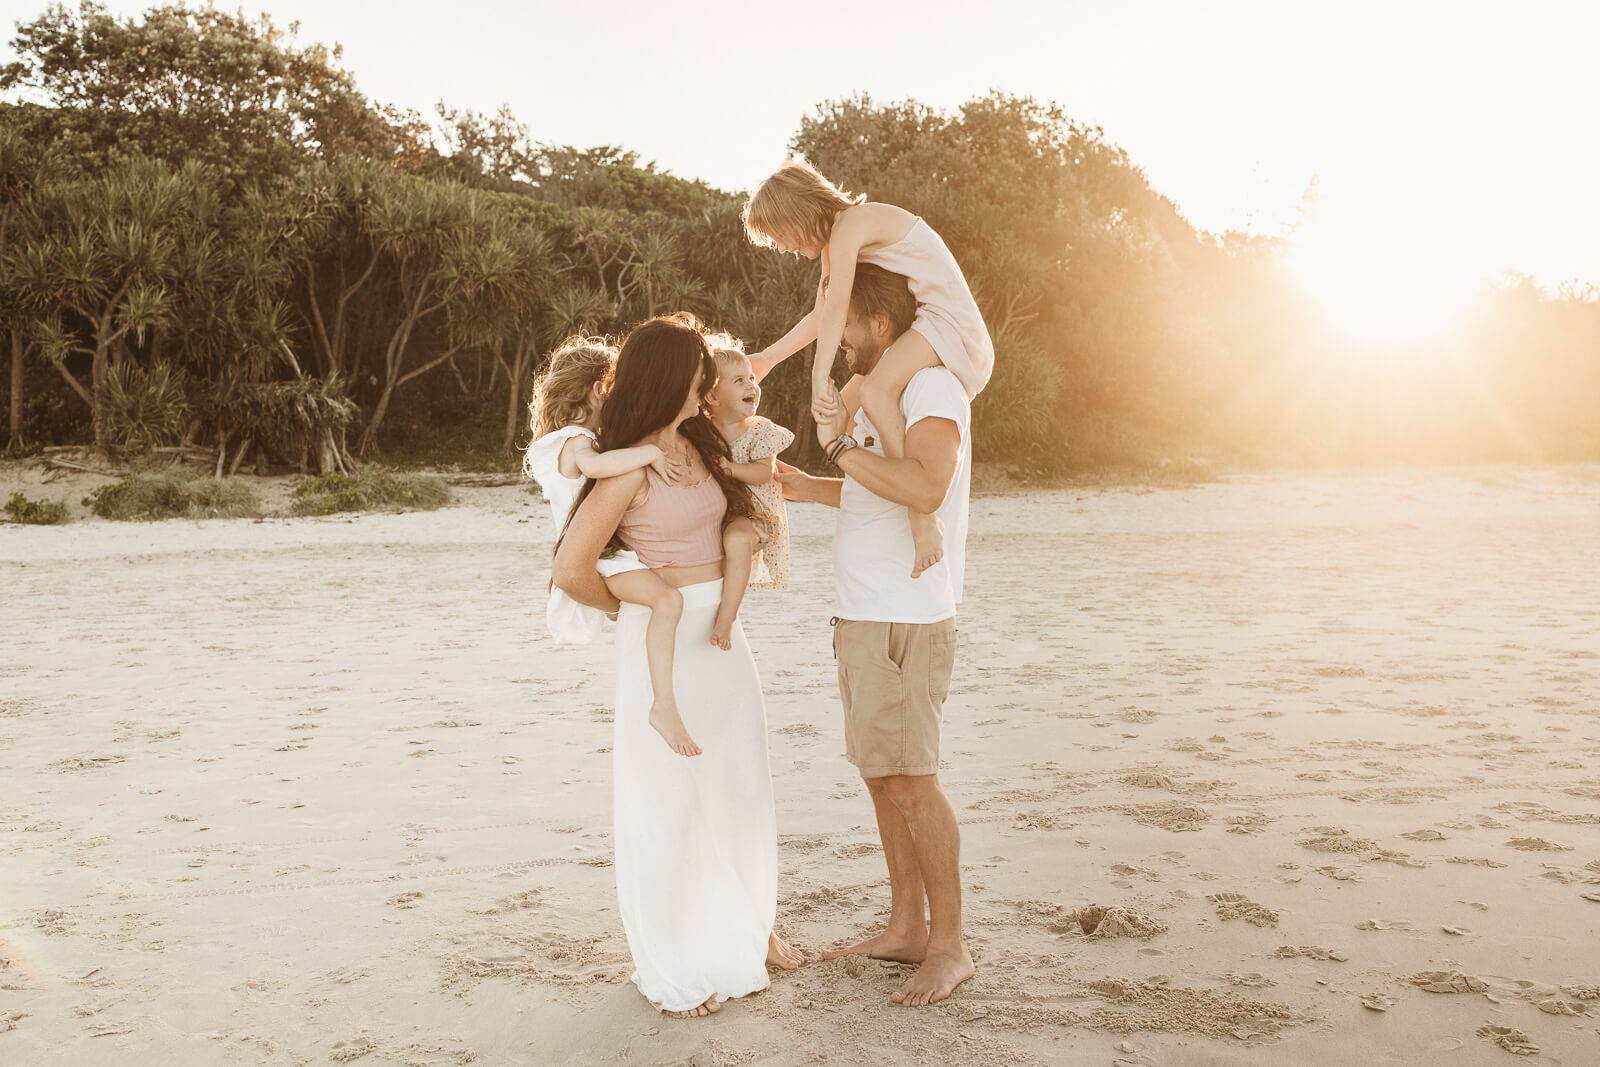 Gold Coast Photographer | What to expect when booking a session